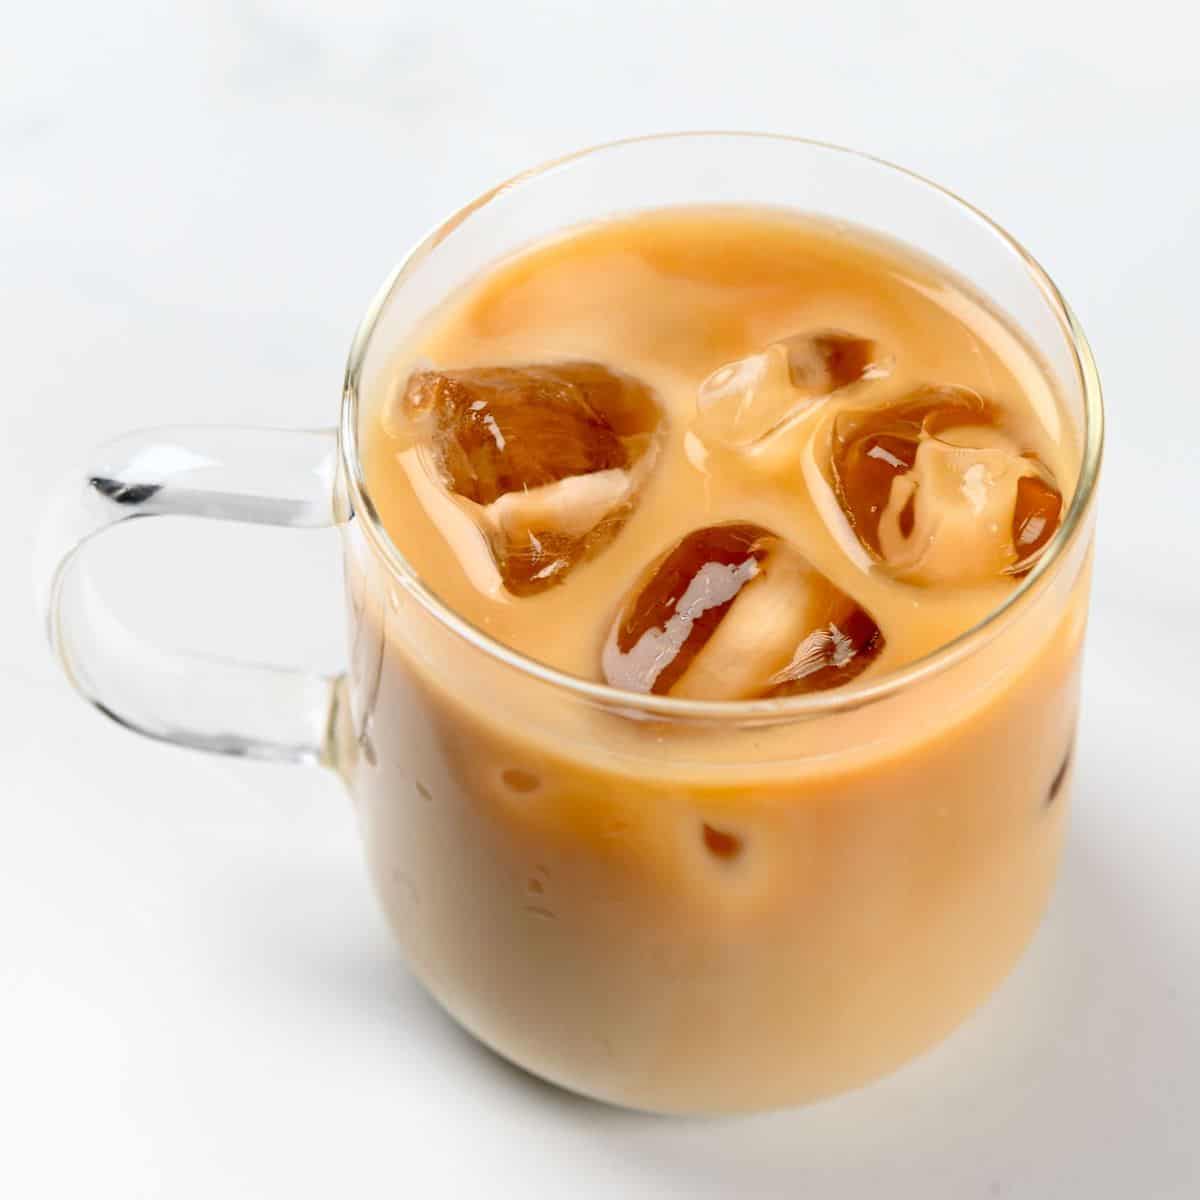 How To Make An Iced Latte - Alphafoodie